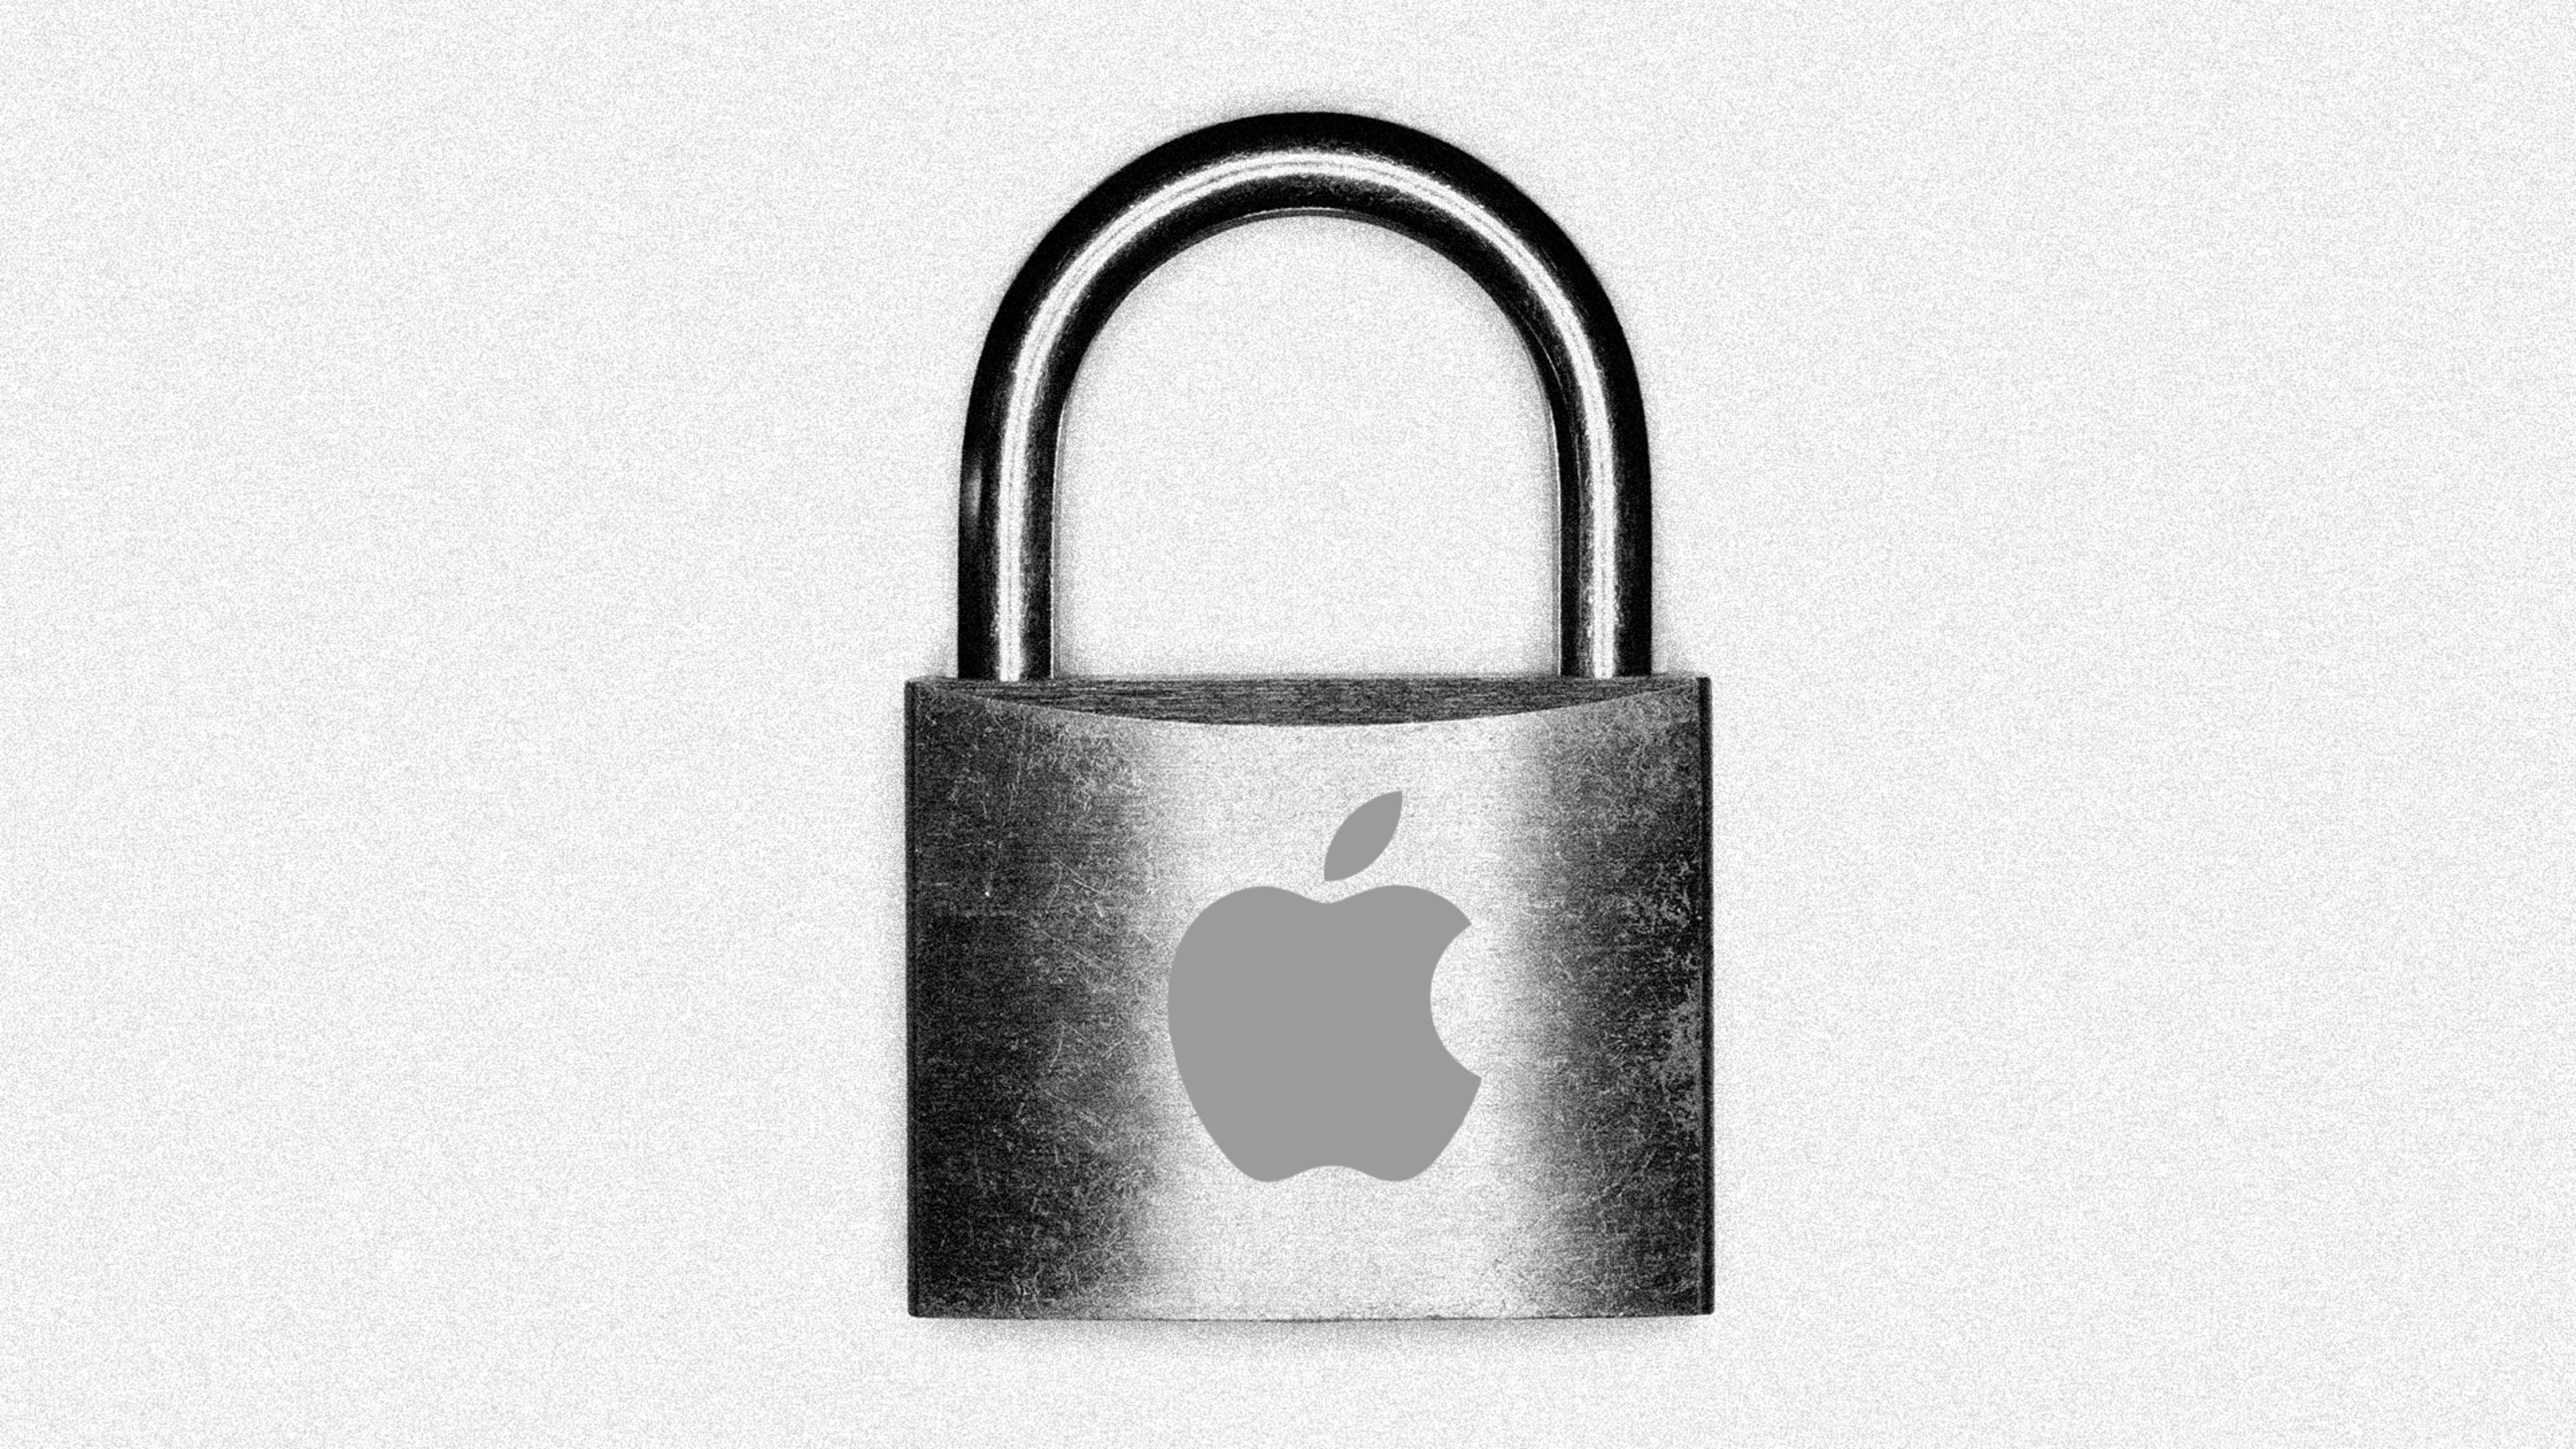 10 ways Apple can supercharge privacy and security in 2022